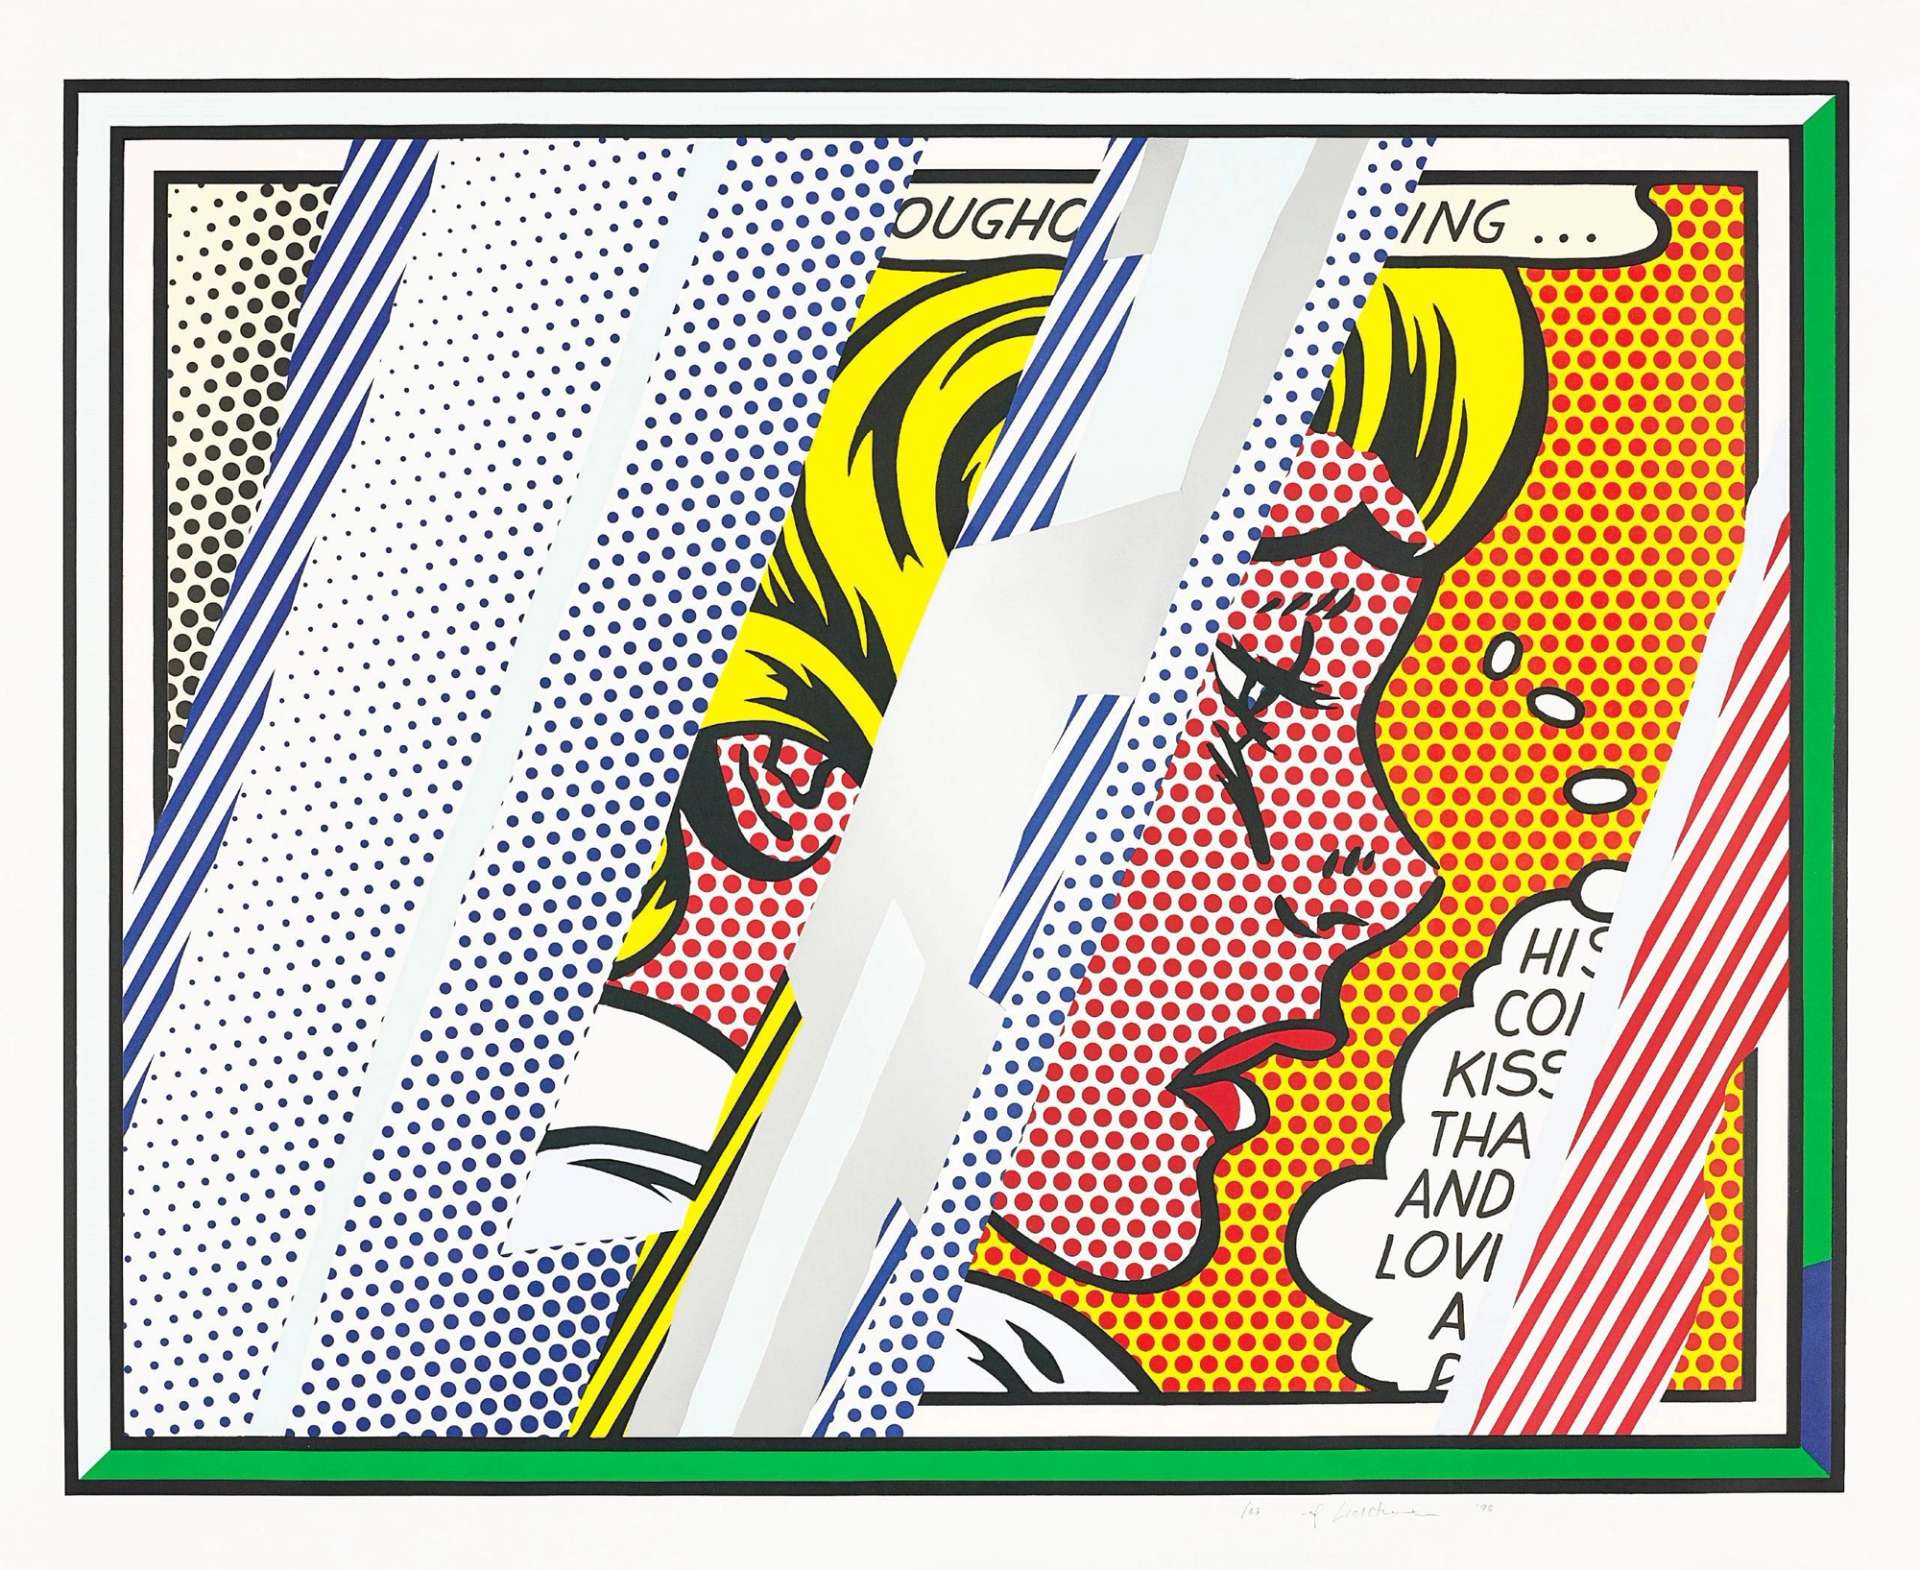 A screenprint by Roy Lichtenstein showing a cartoonish image of a woman obscured by reflections delineated in graphic lines and dots